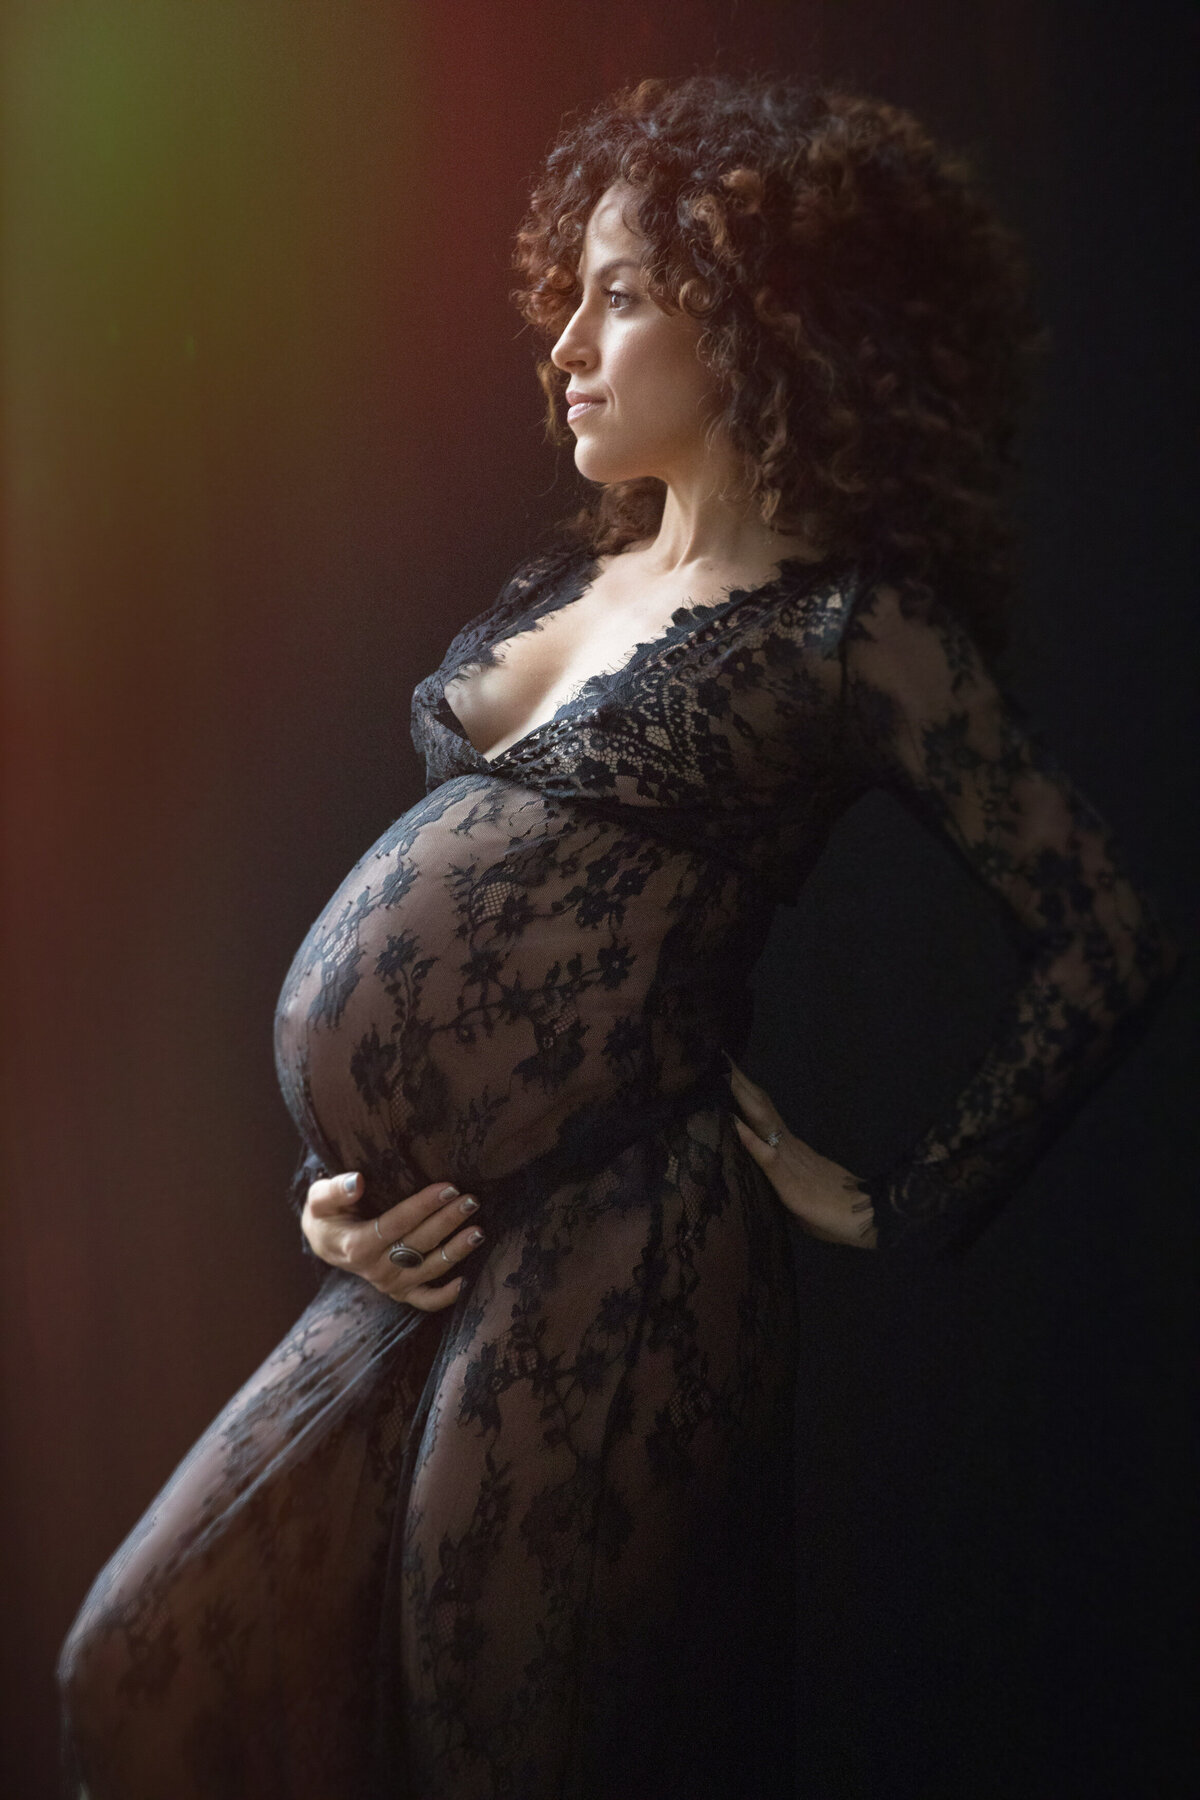 A pregnant woman holding her stomach with one hand while the other is on her back.